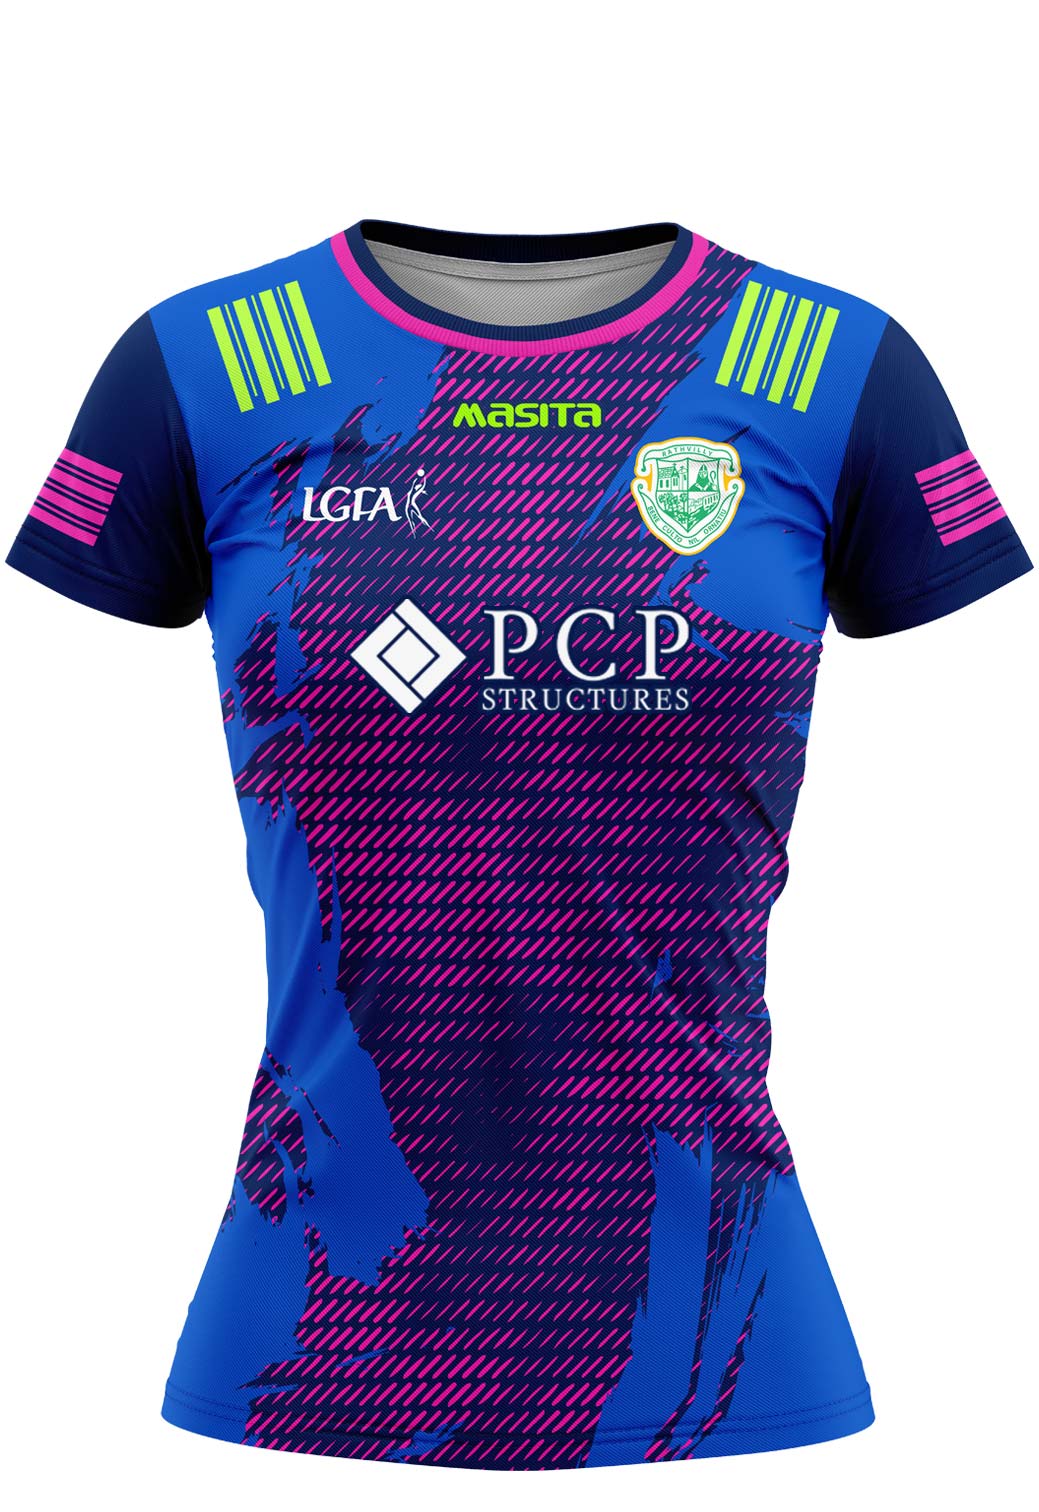 Rathvilly LGFA Pink Boa Style Training Jersey Player Fit Adult